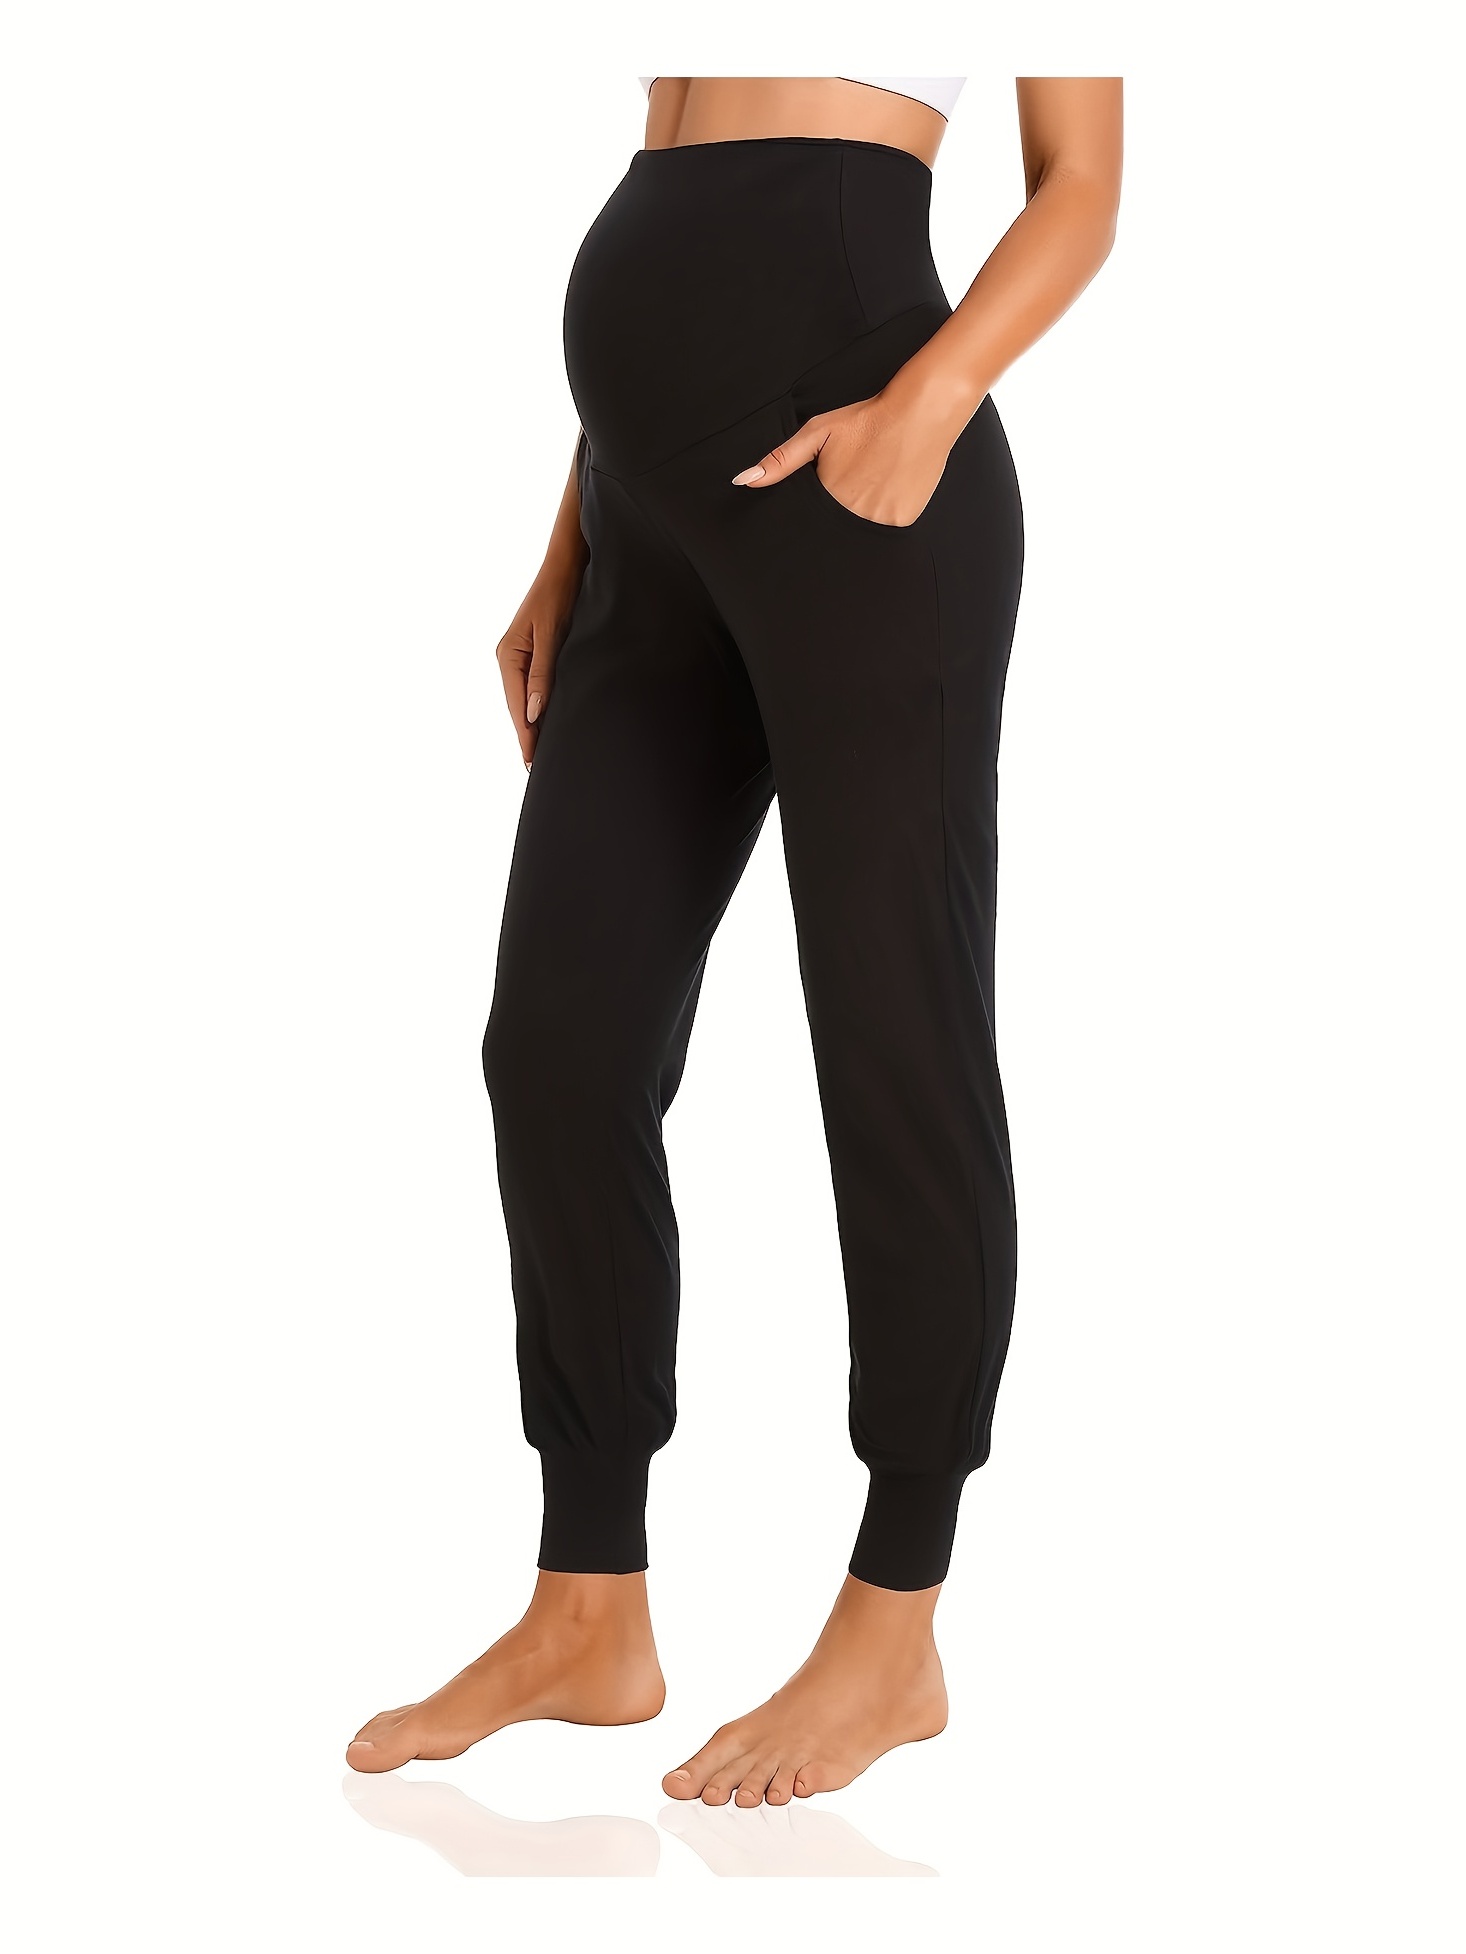 Foucome Women's Maternity Pants Relaxed Fit Straight Leg Cargo